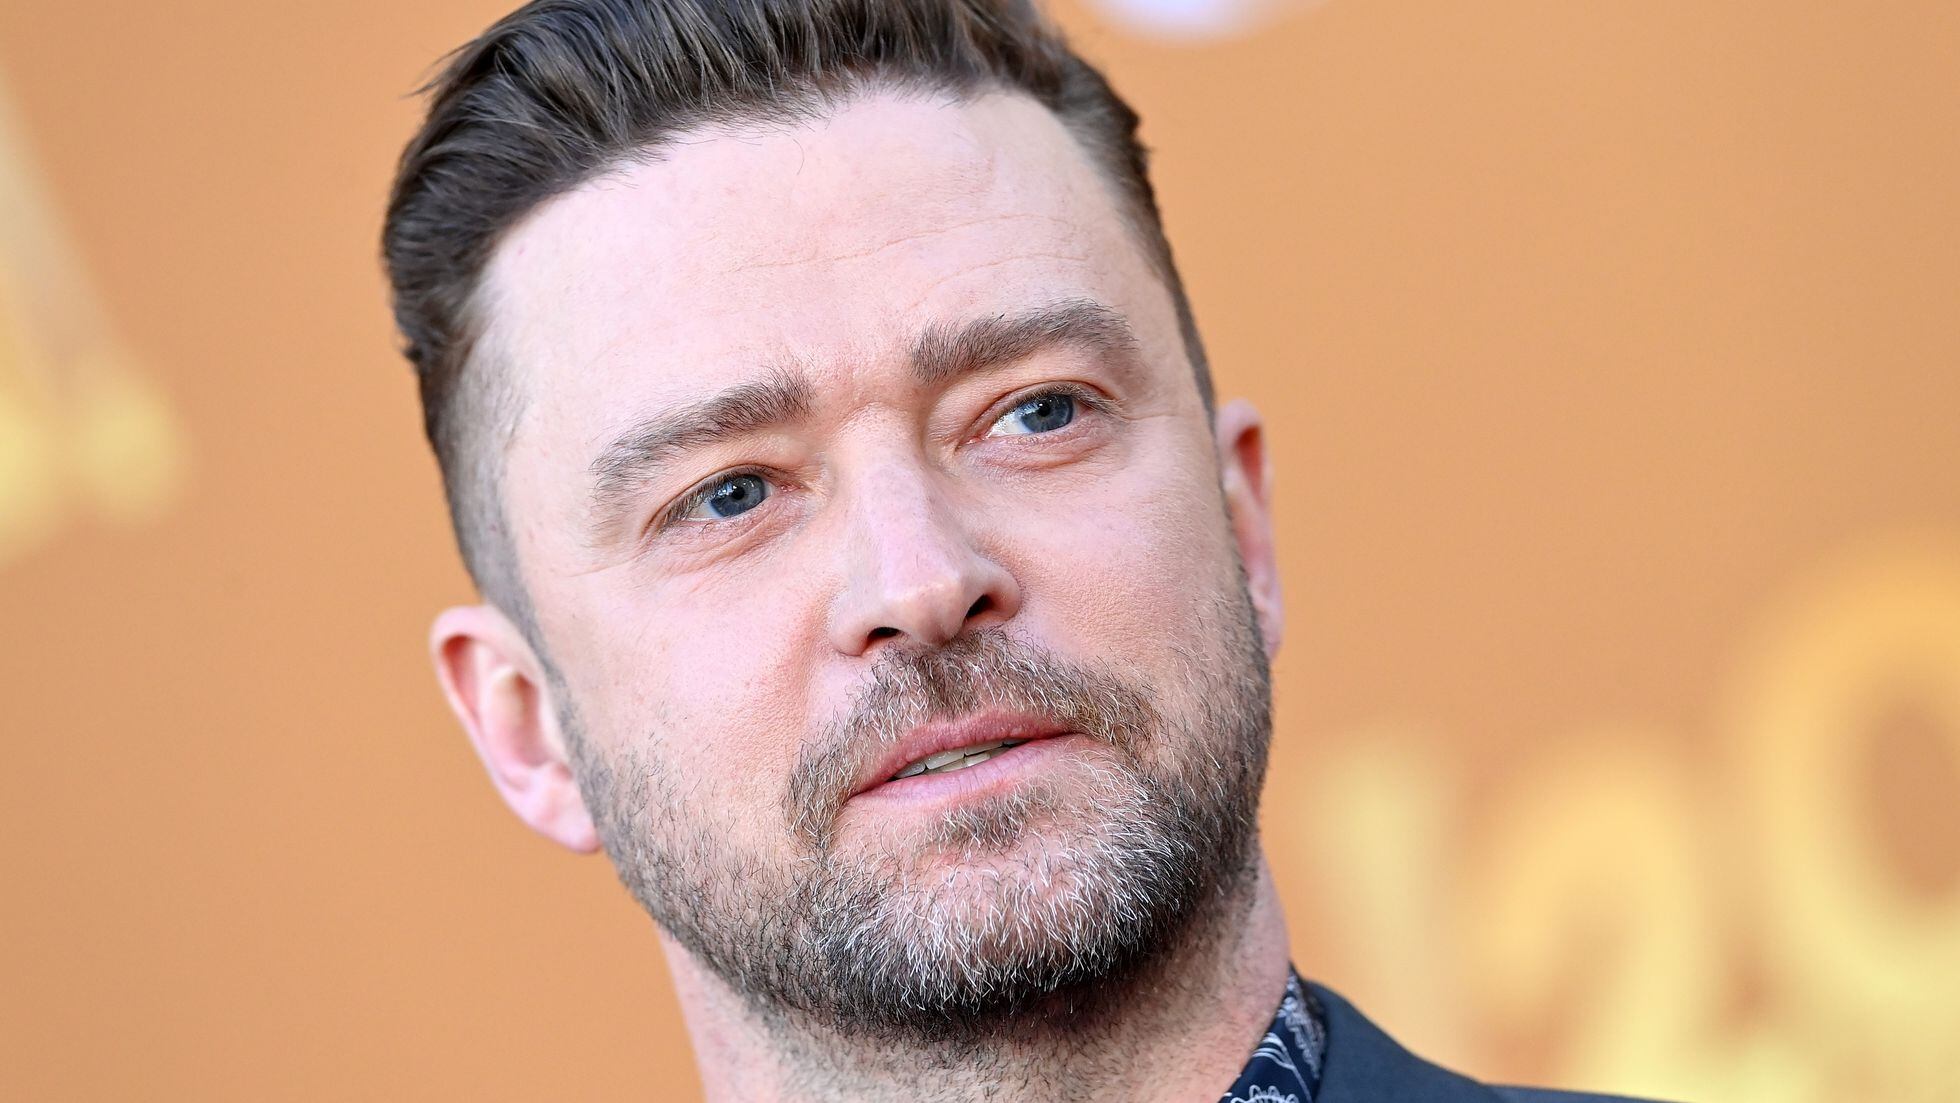 Justin Timberlake releases new single